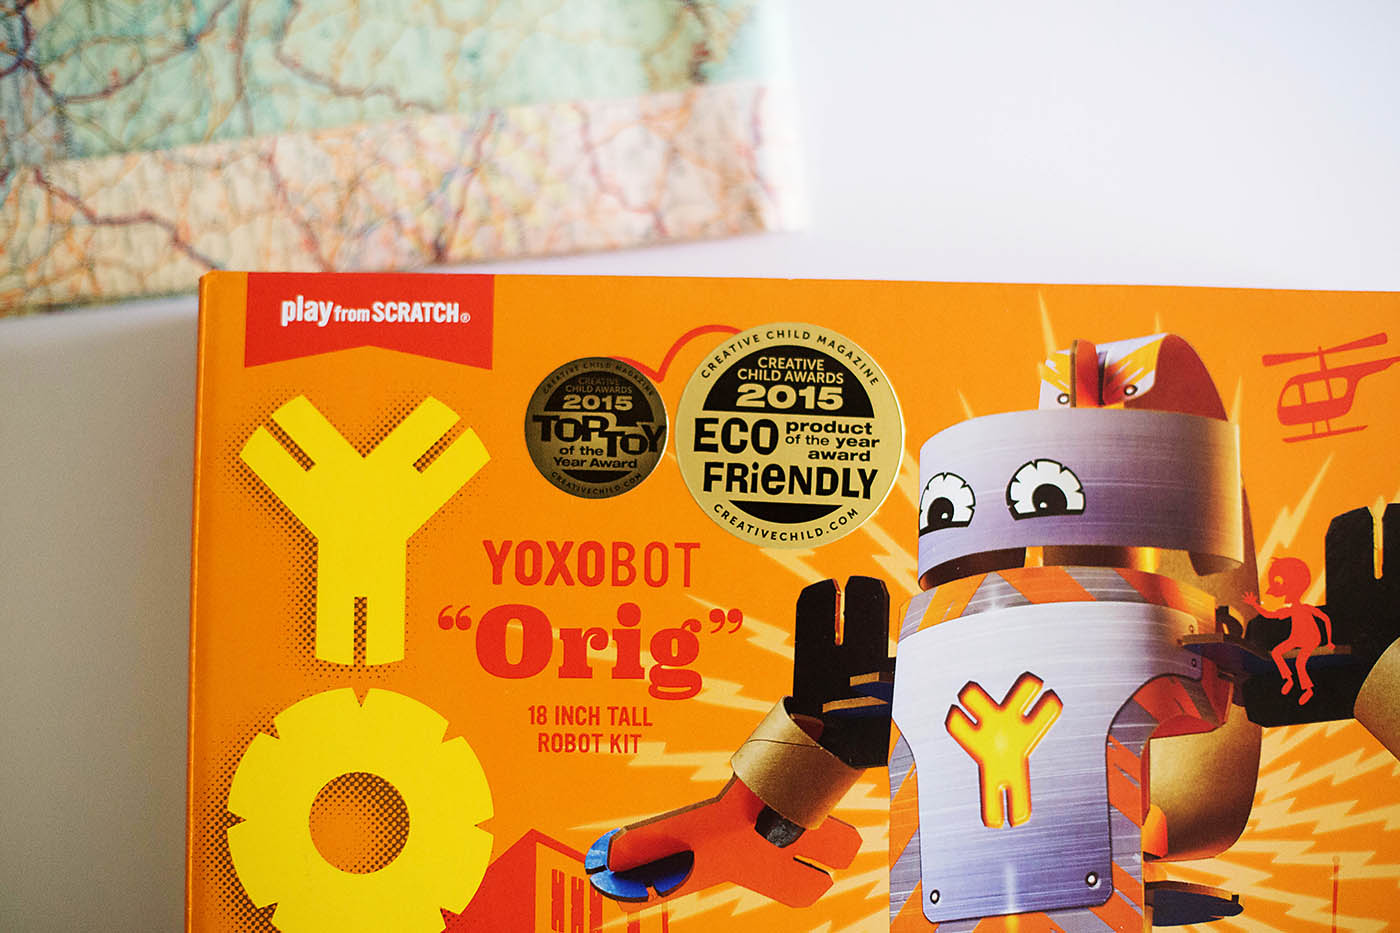 YOXO building toy set - a great gift idea!